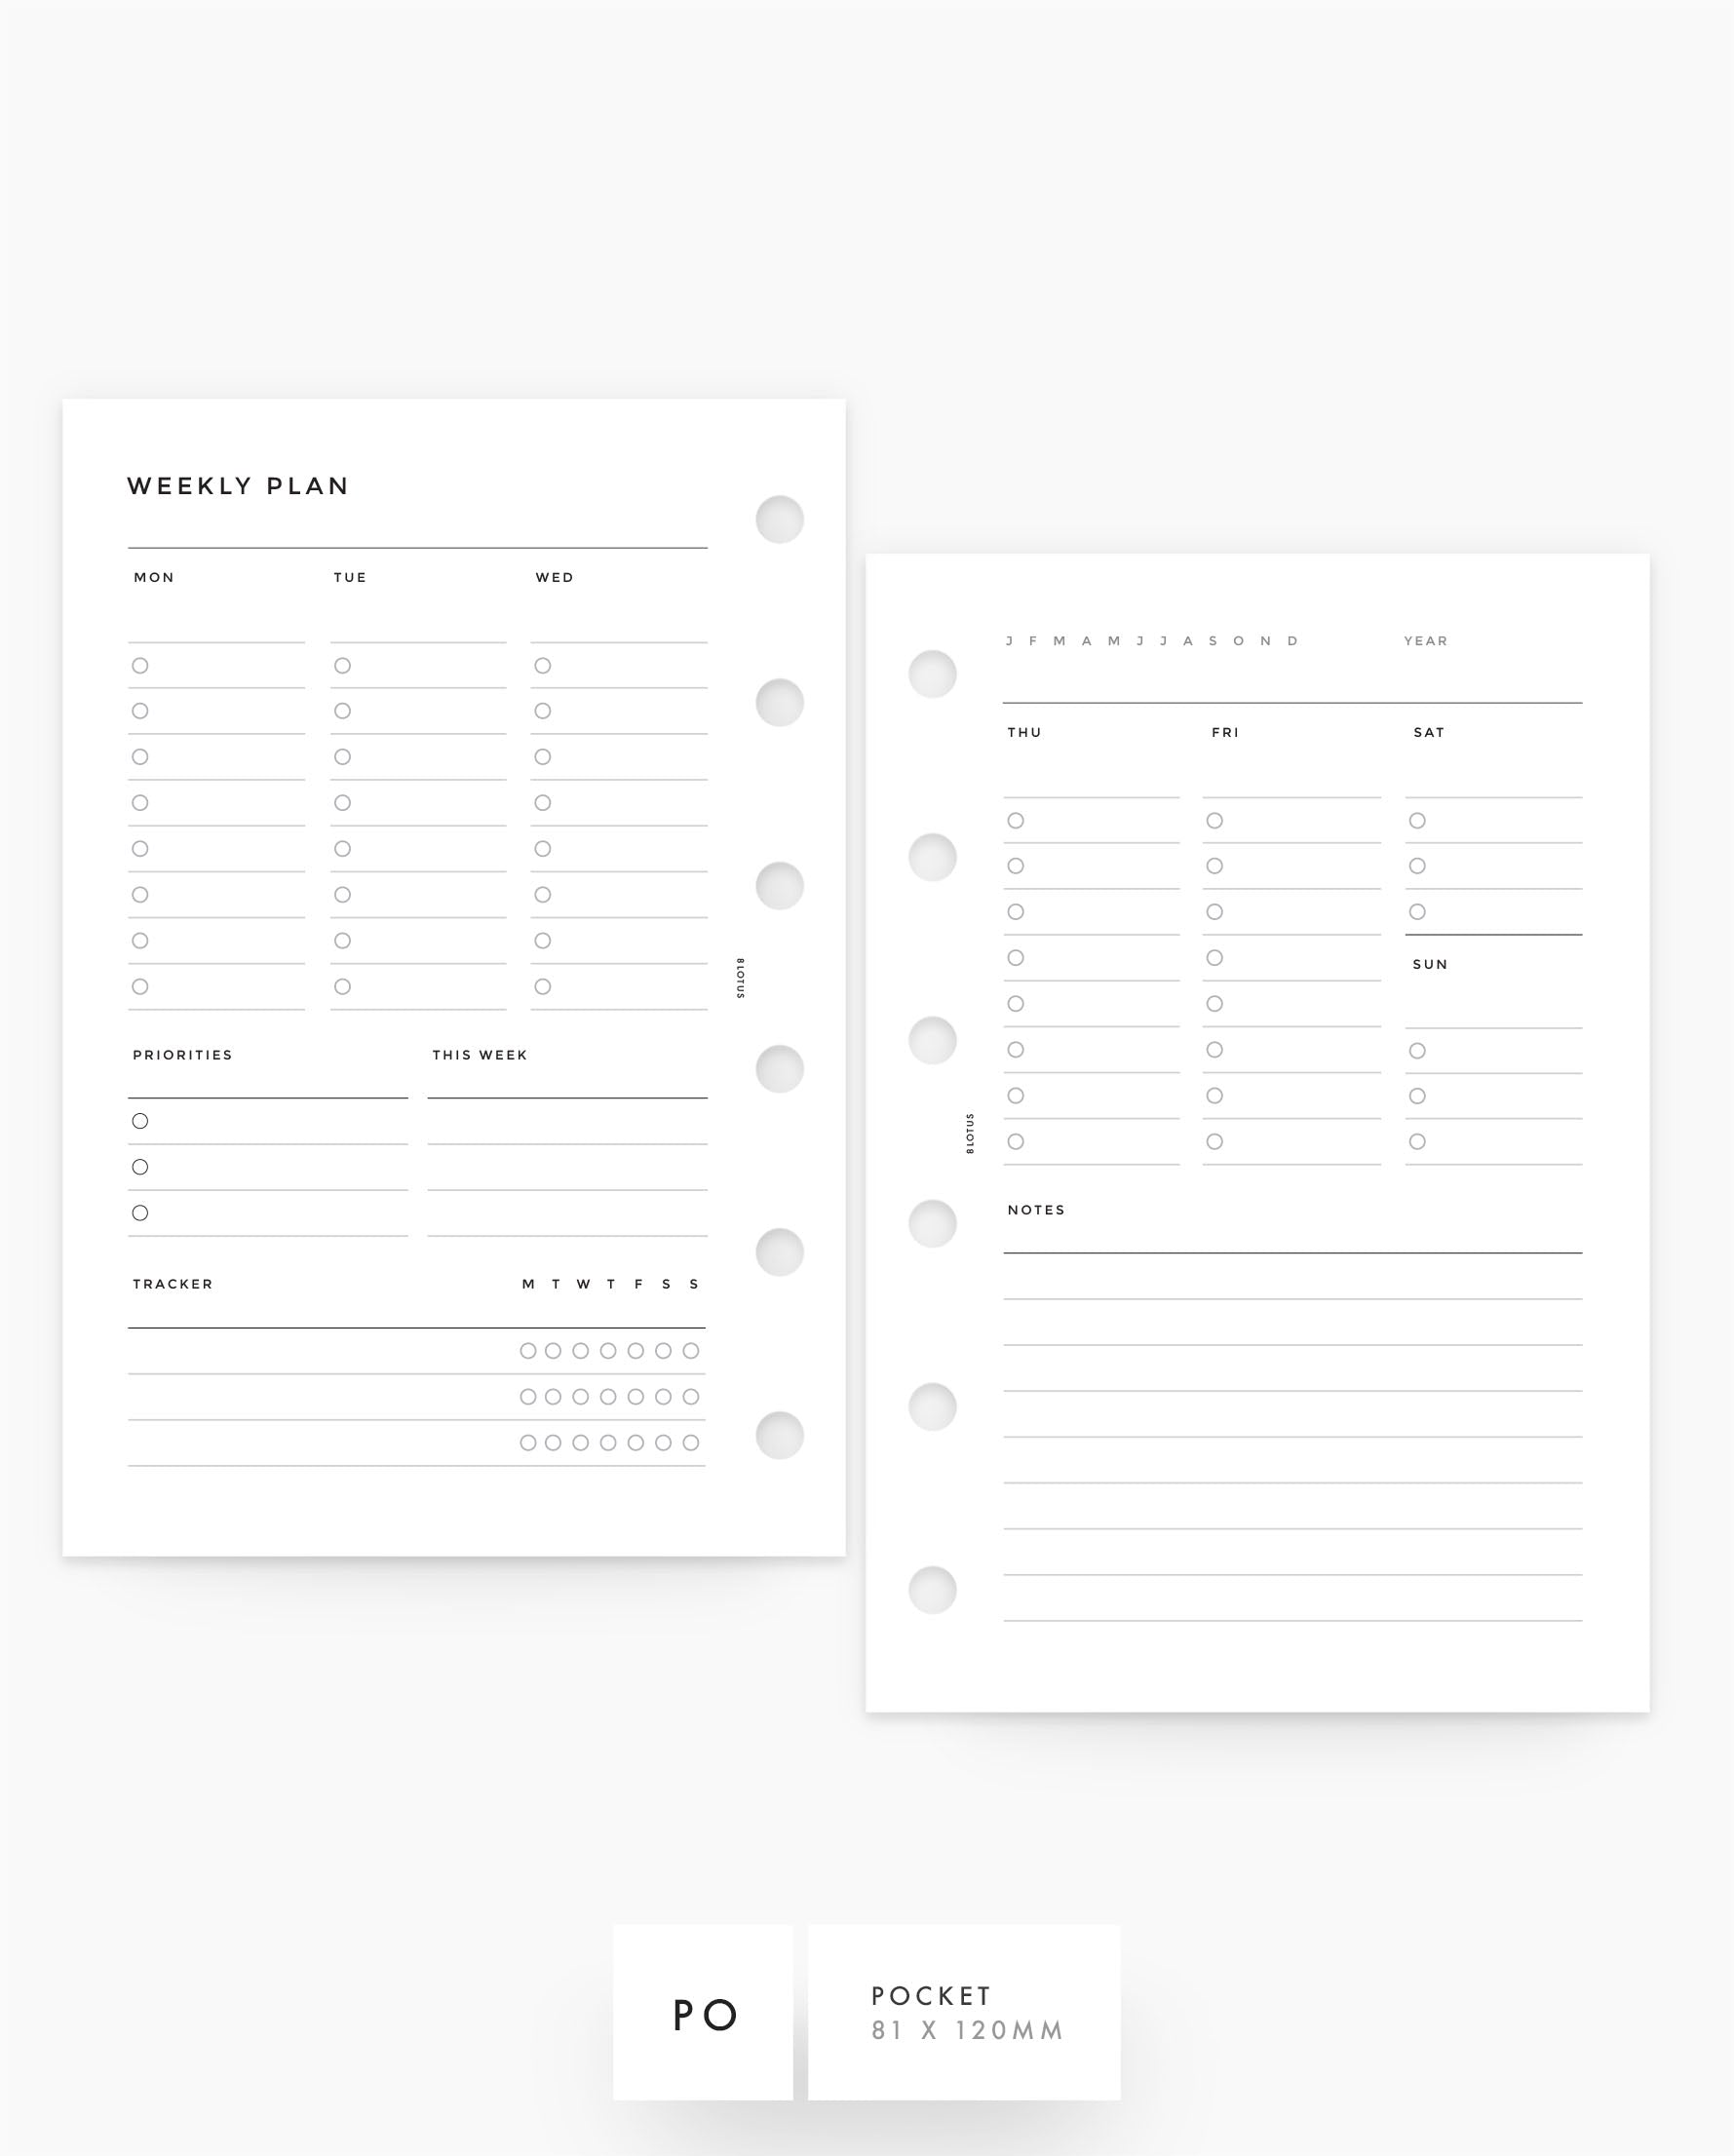 MN236 - Dual Weekly Planner Inserts